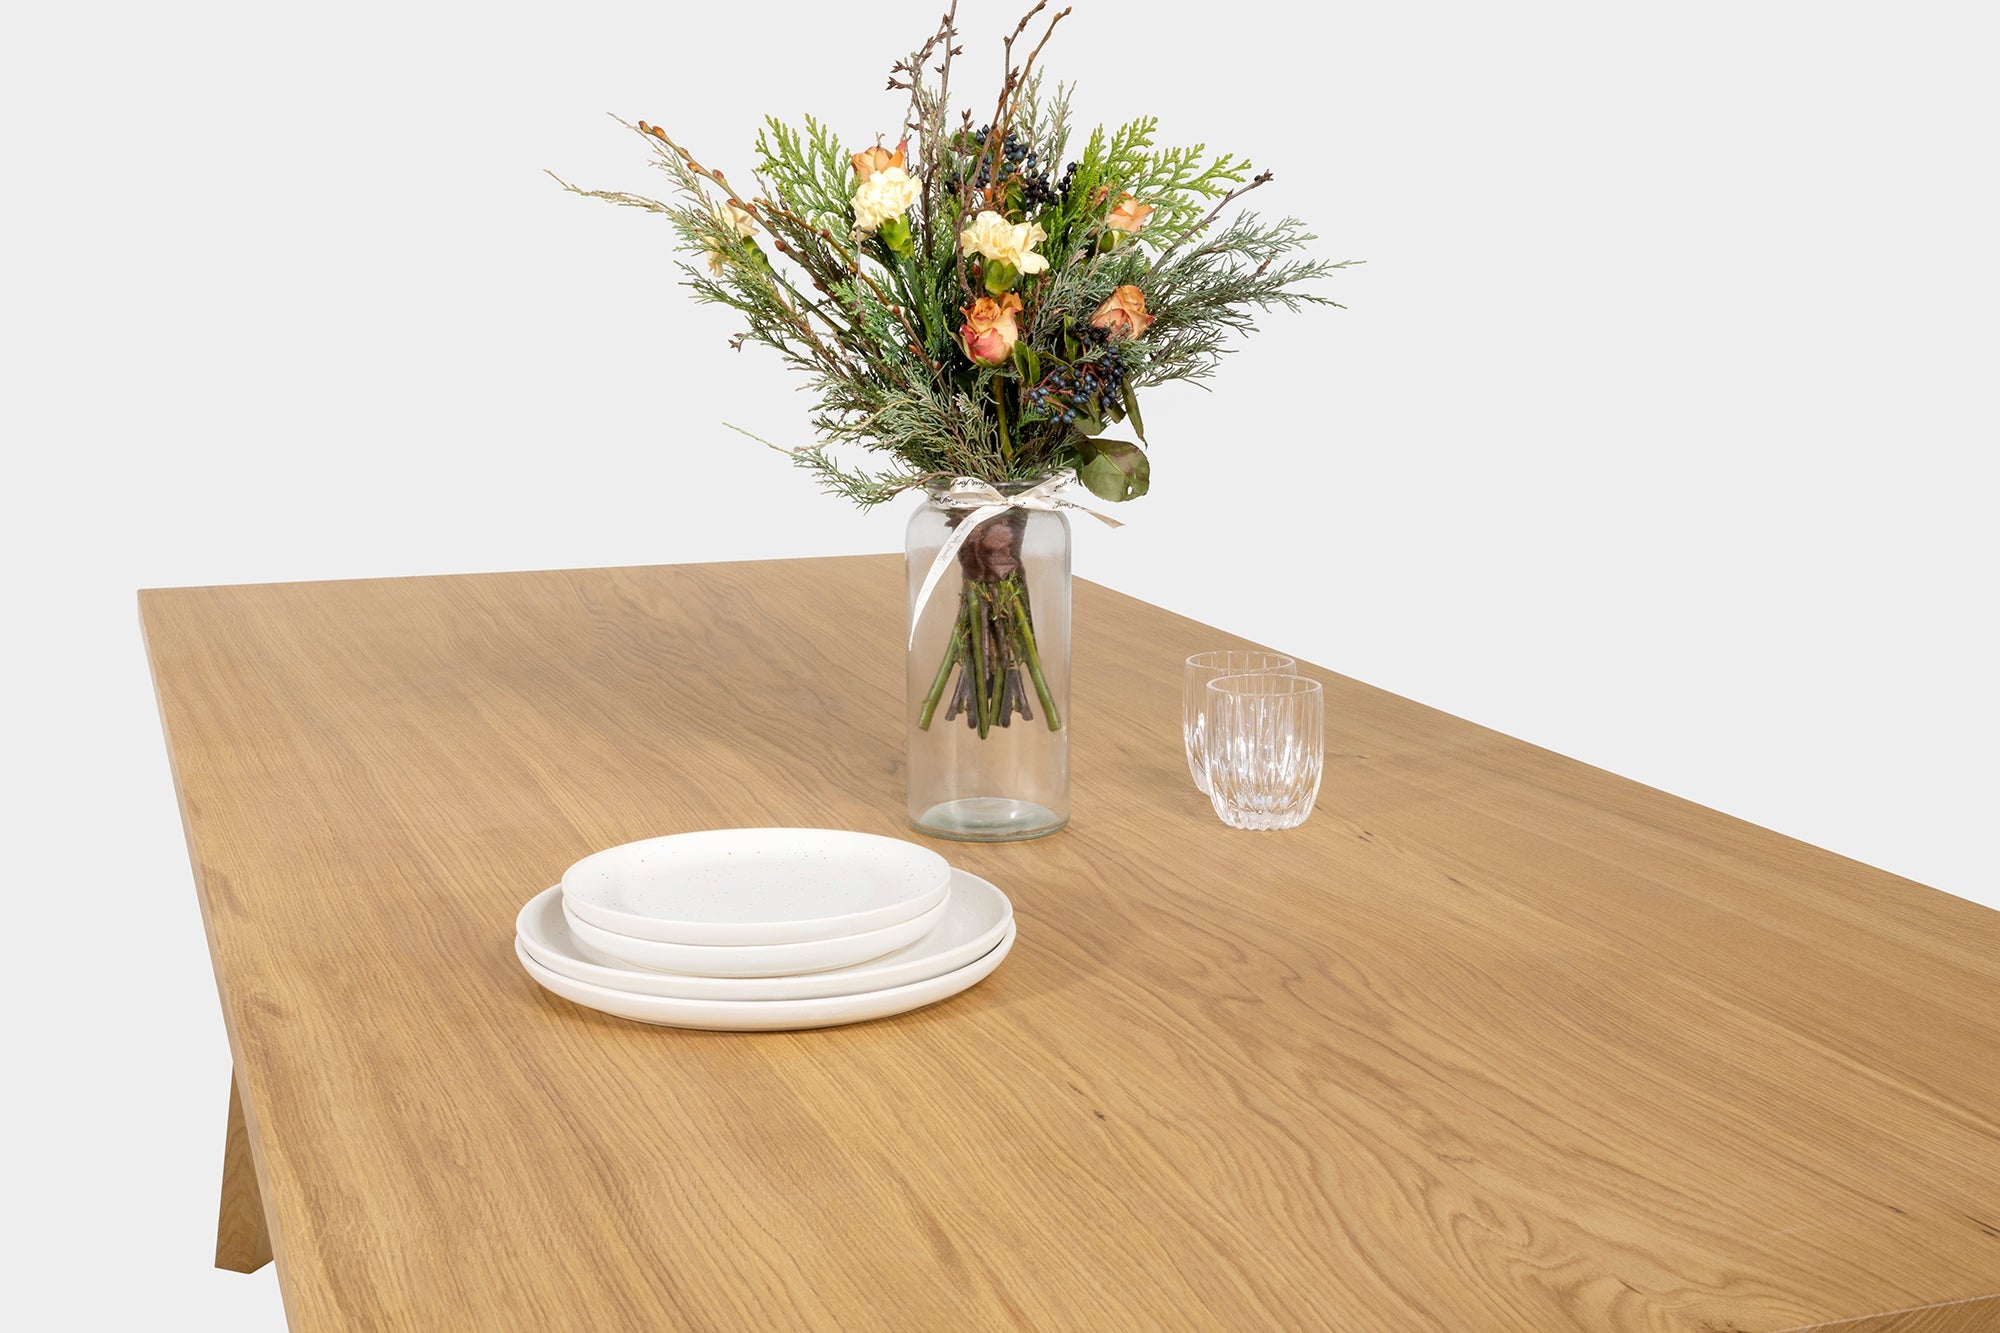 Handmade Table And Extendable Dining Table In Oak Or Walnut | AMBER Table-Hardman Design